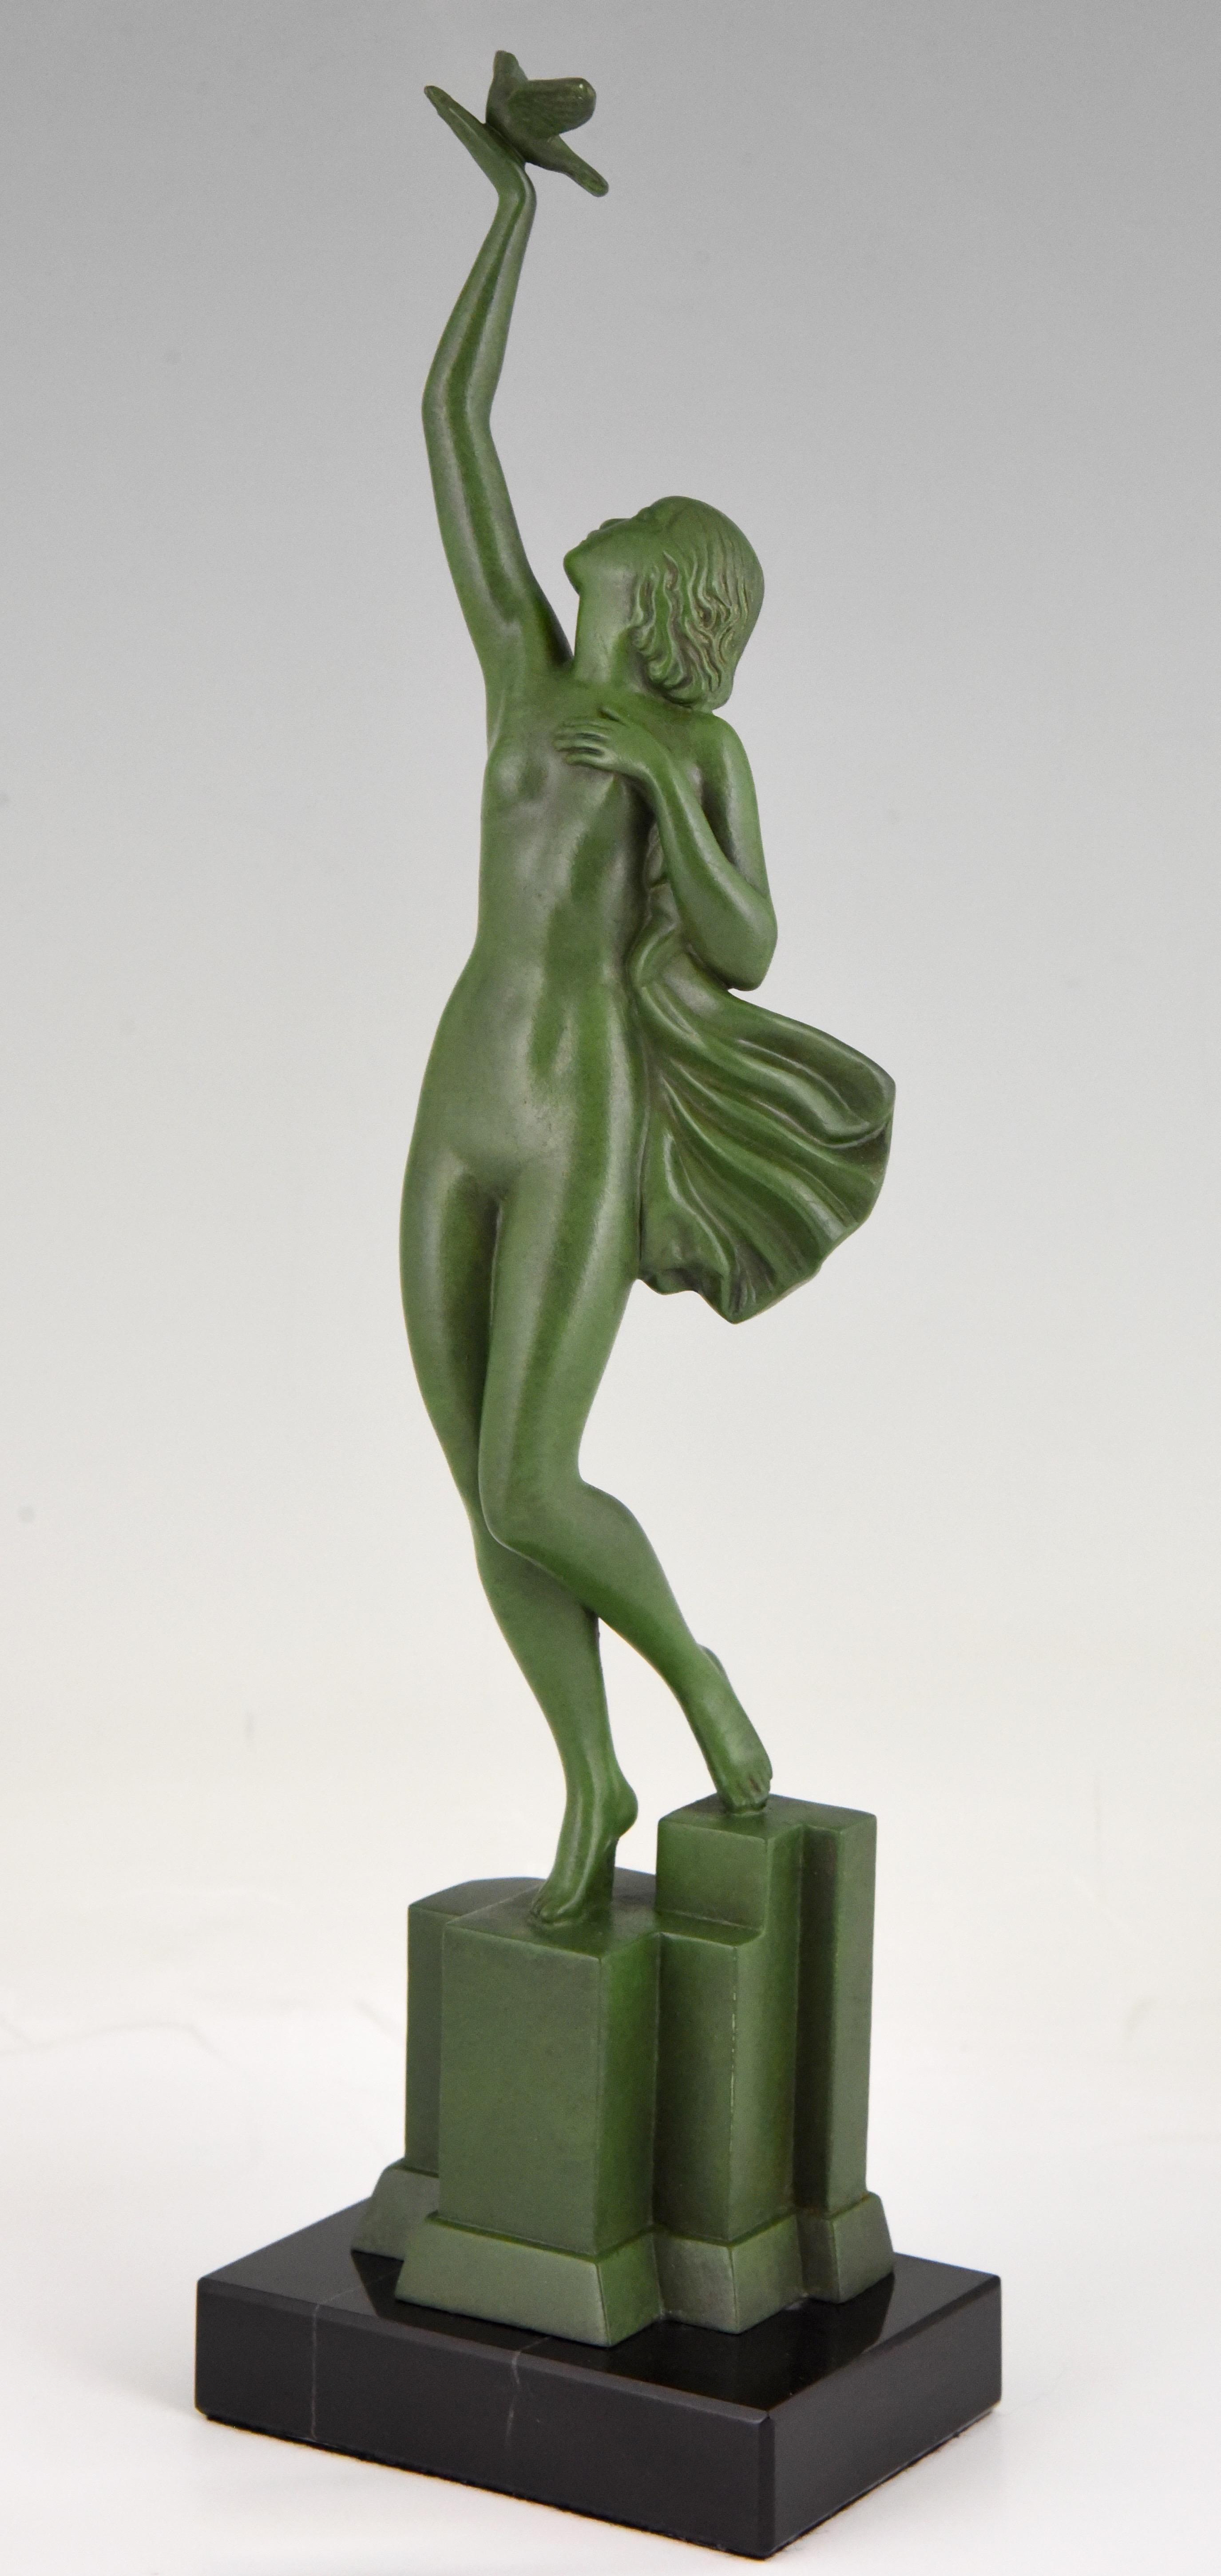 Message of love, Art Deco sculpture of a nude holding a dove signed Fayral, pseudonym of Pierre Le Faguays. France 1930.
Patinated art metal on black marble base. 

Literature:
